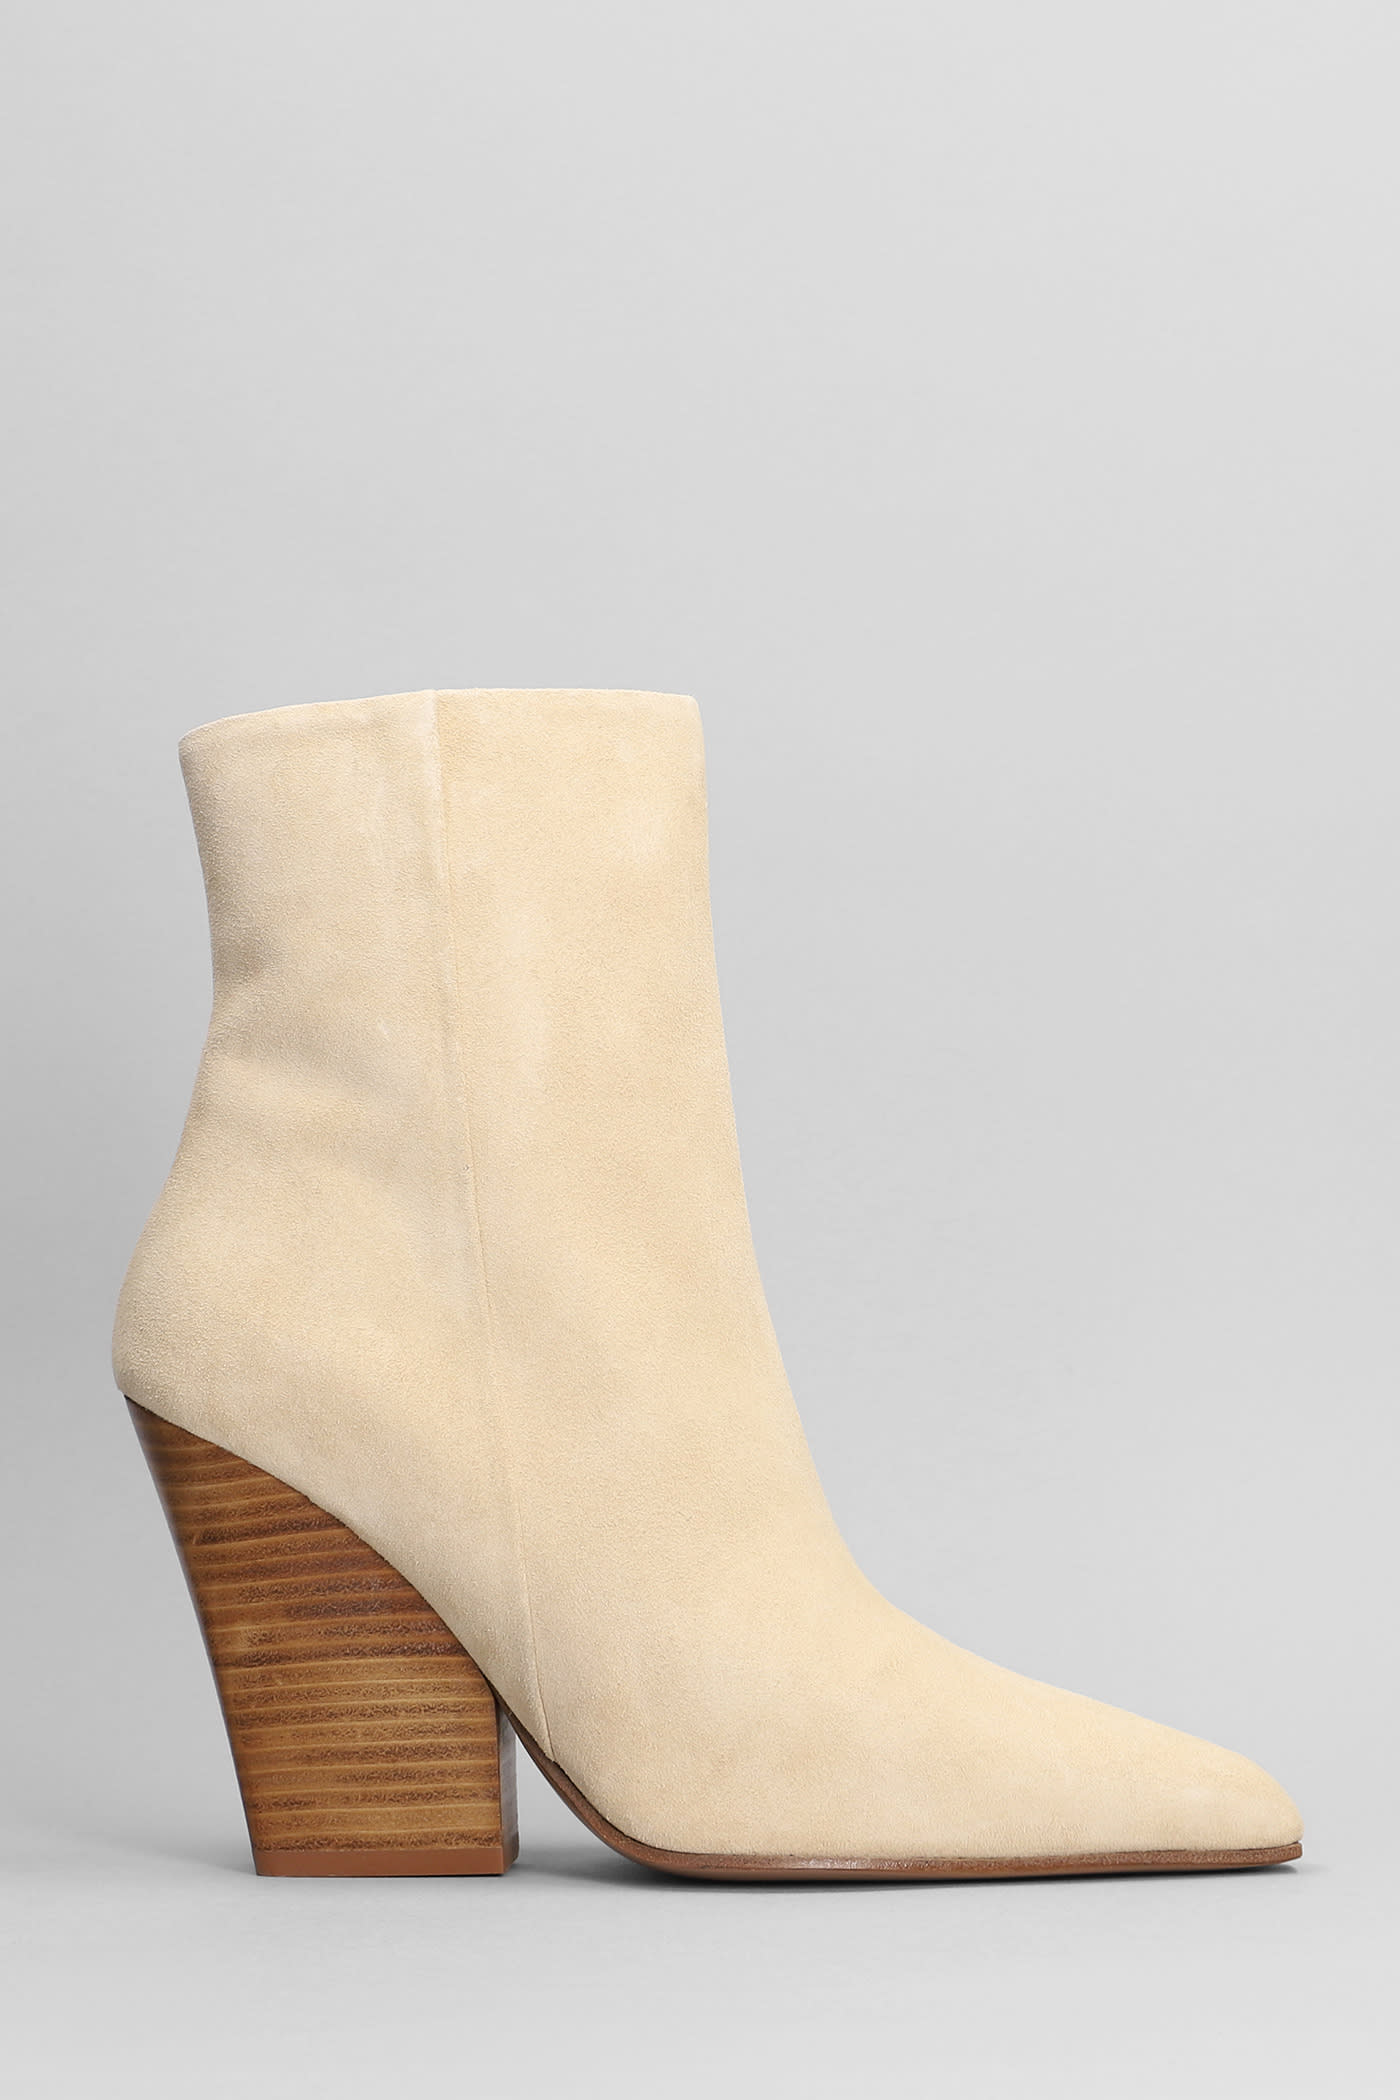 Paris Texas Jane Texan Ankle Boots In Beige Suede